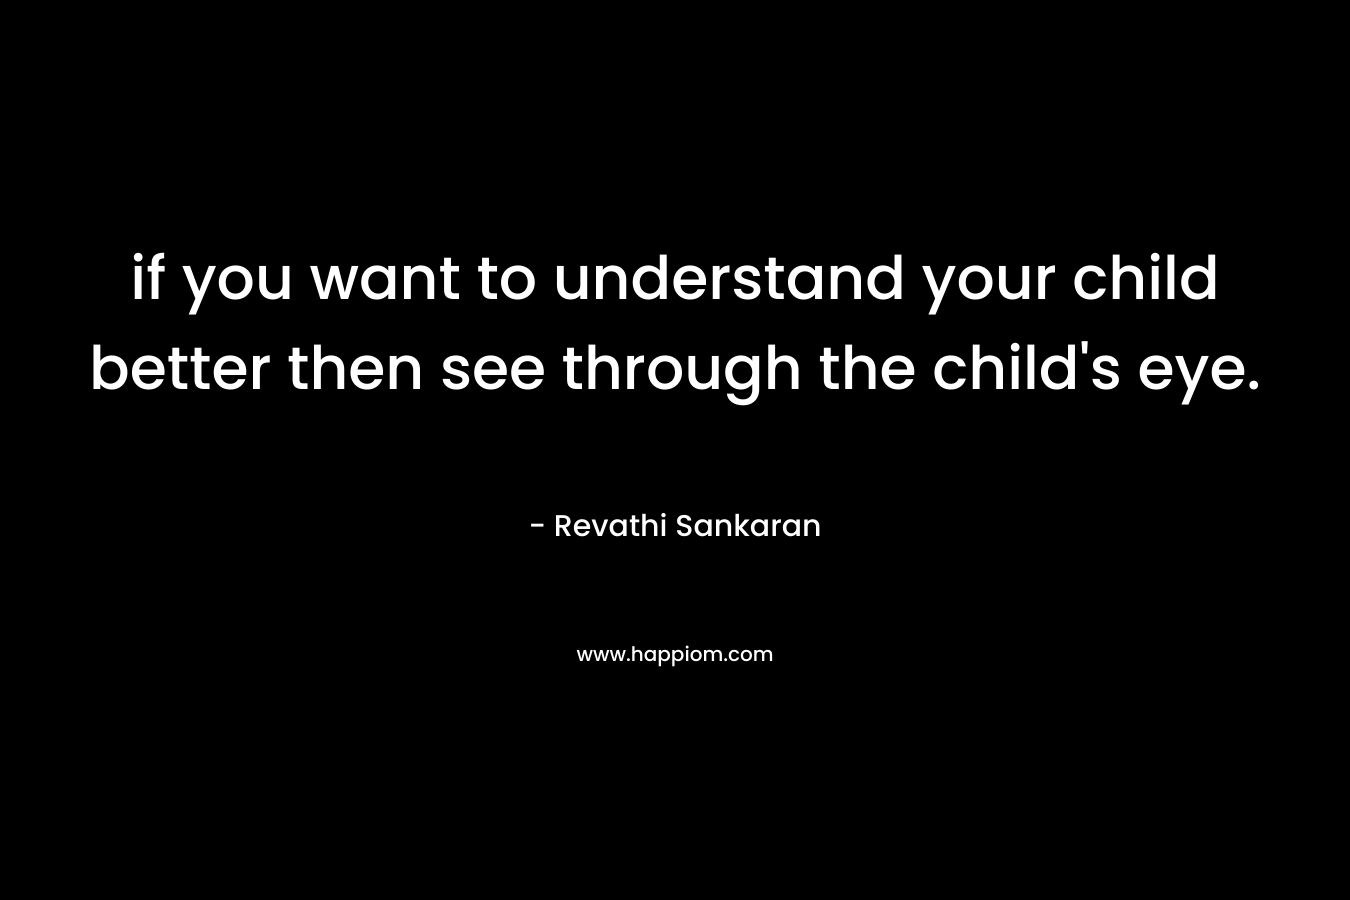 if you want to understand your child better then see through the child's eye.